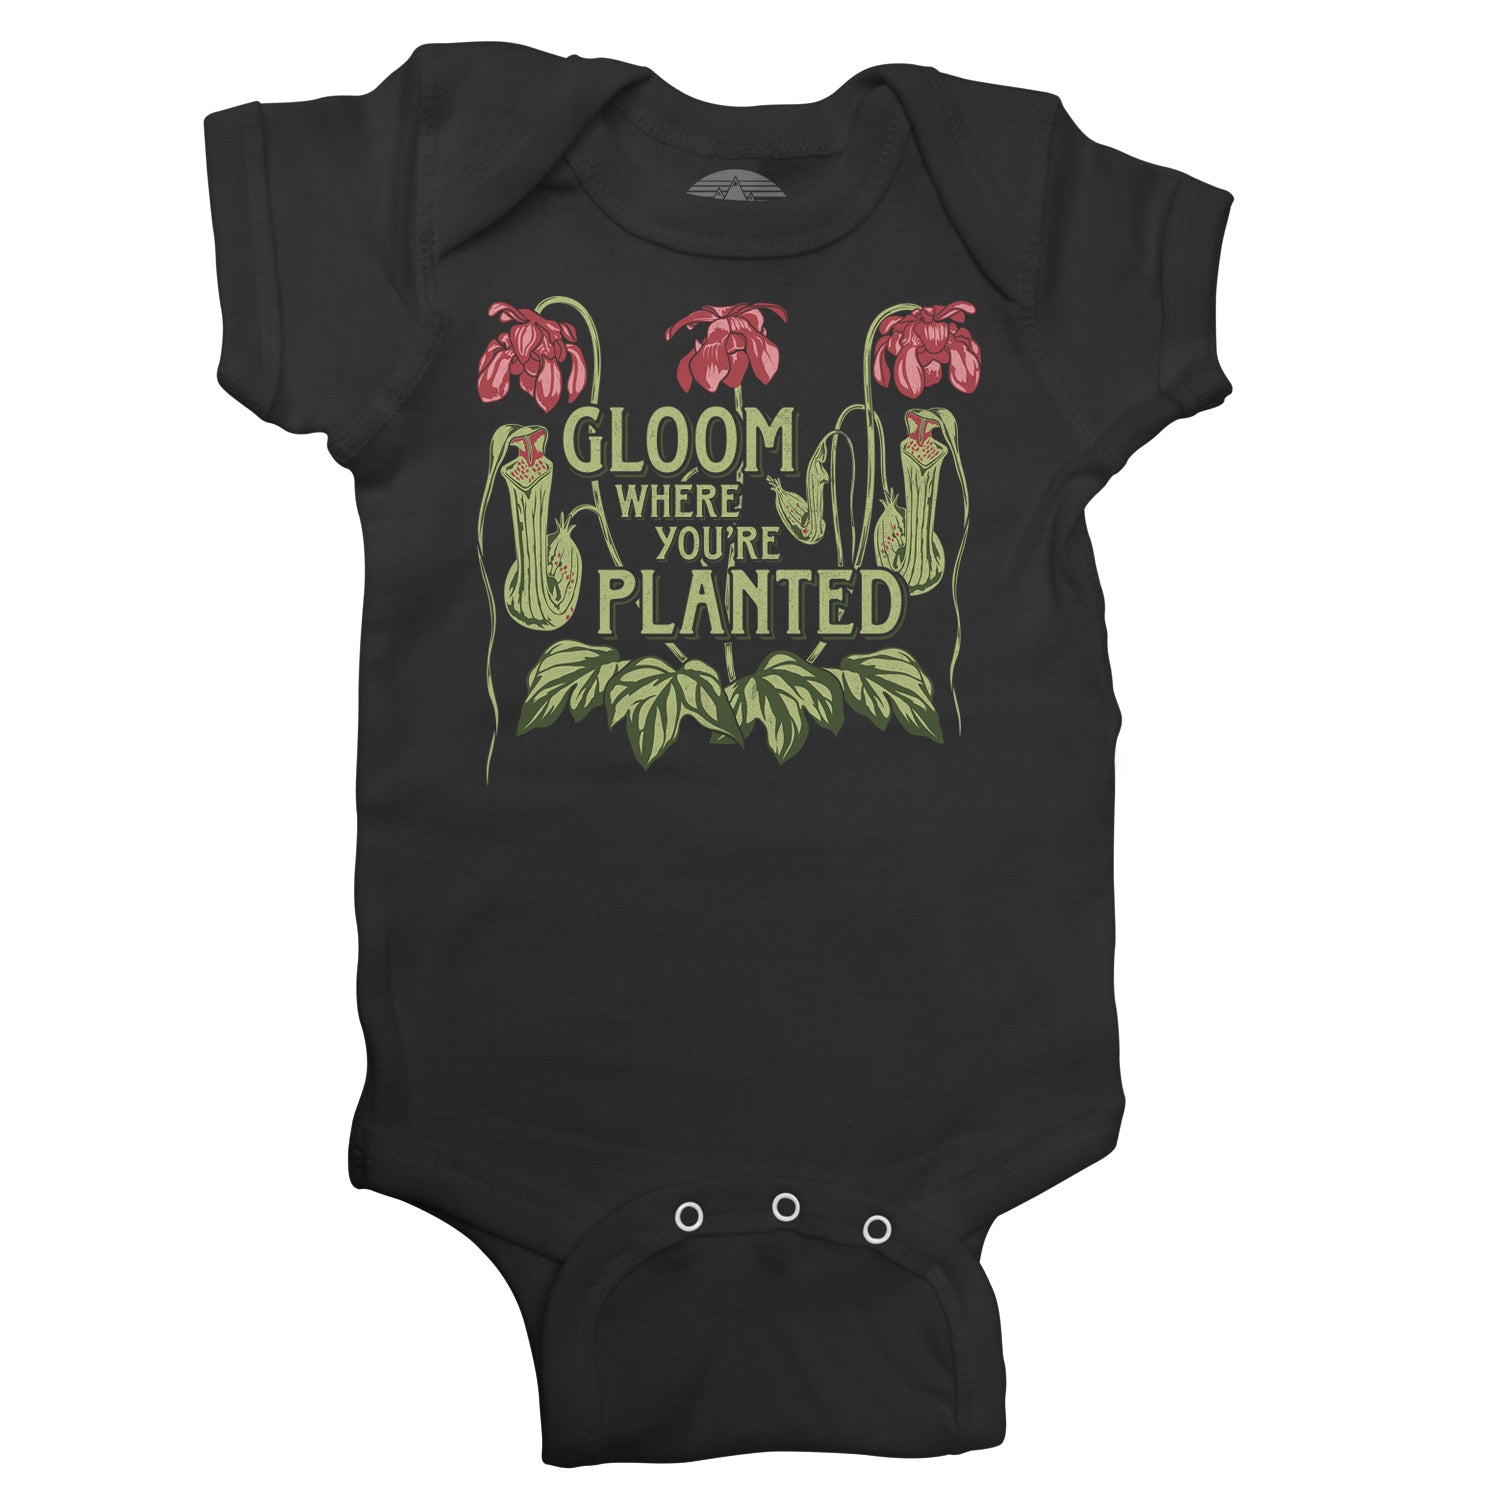 Gloom Where You're Planted Infant Bodysuit - Unisex Fit